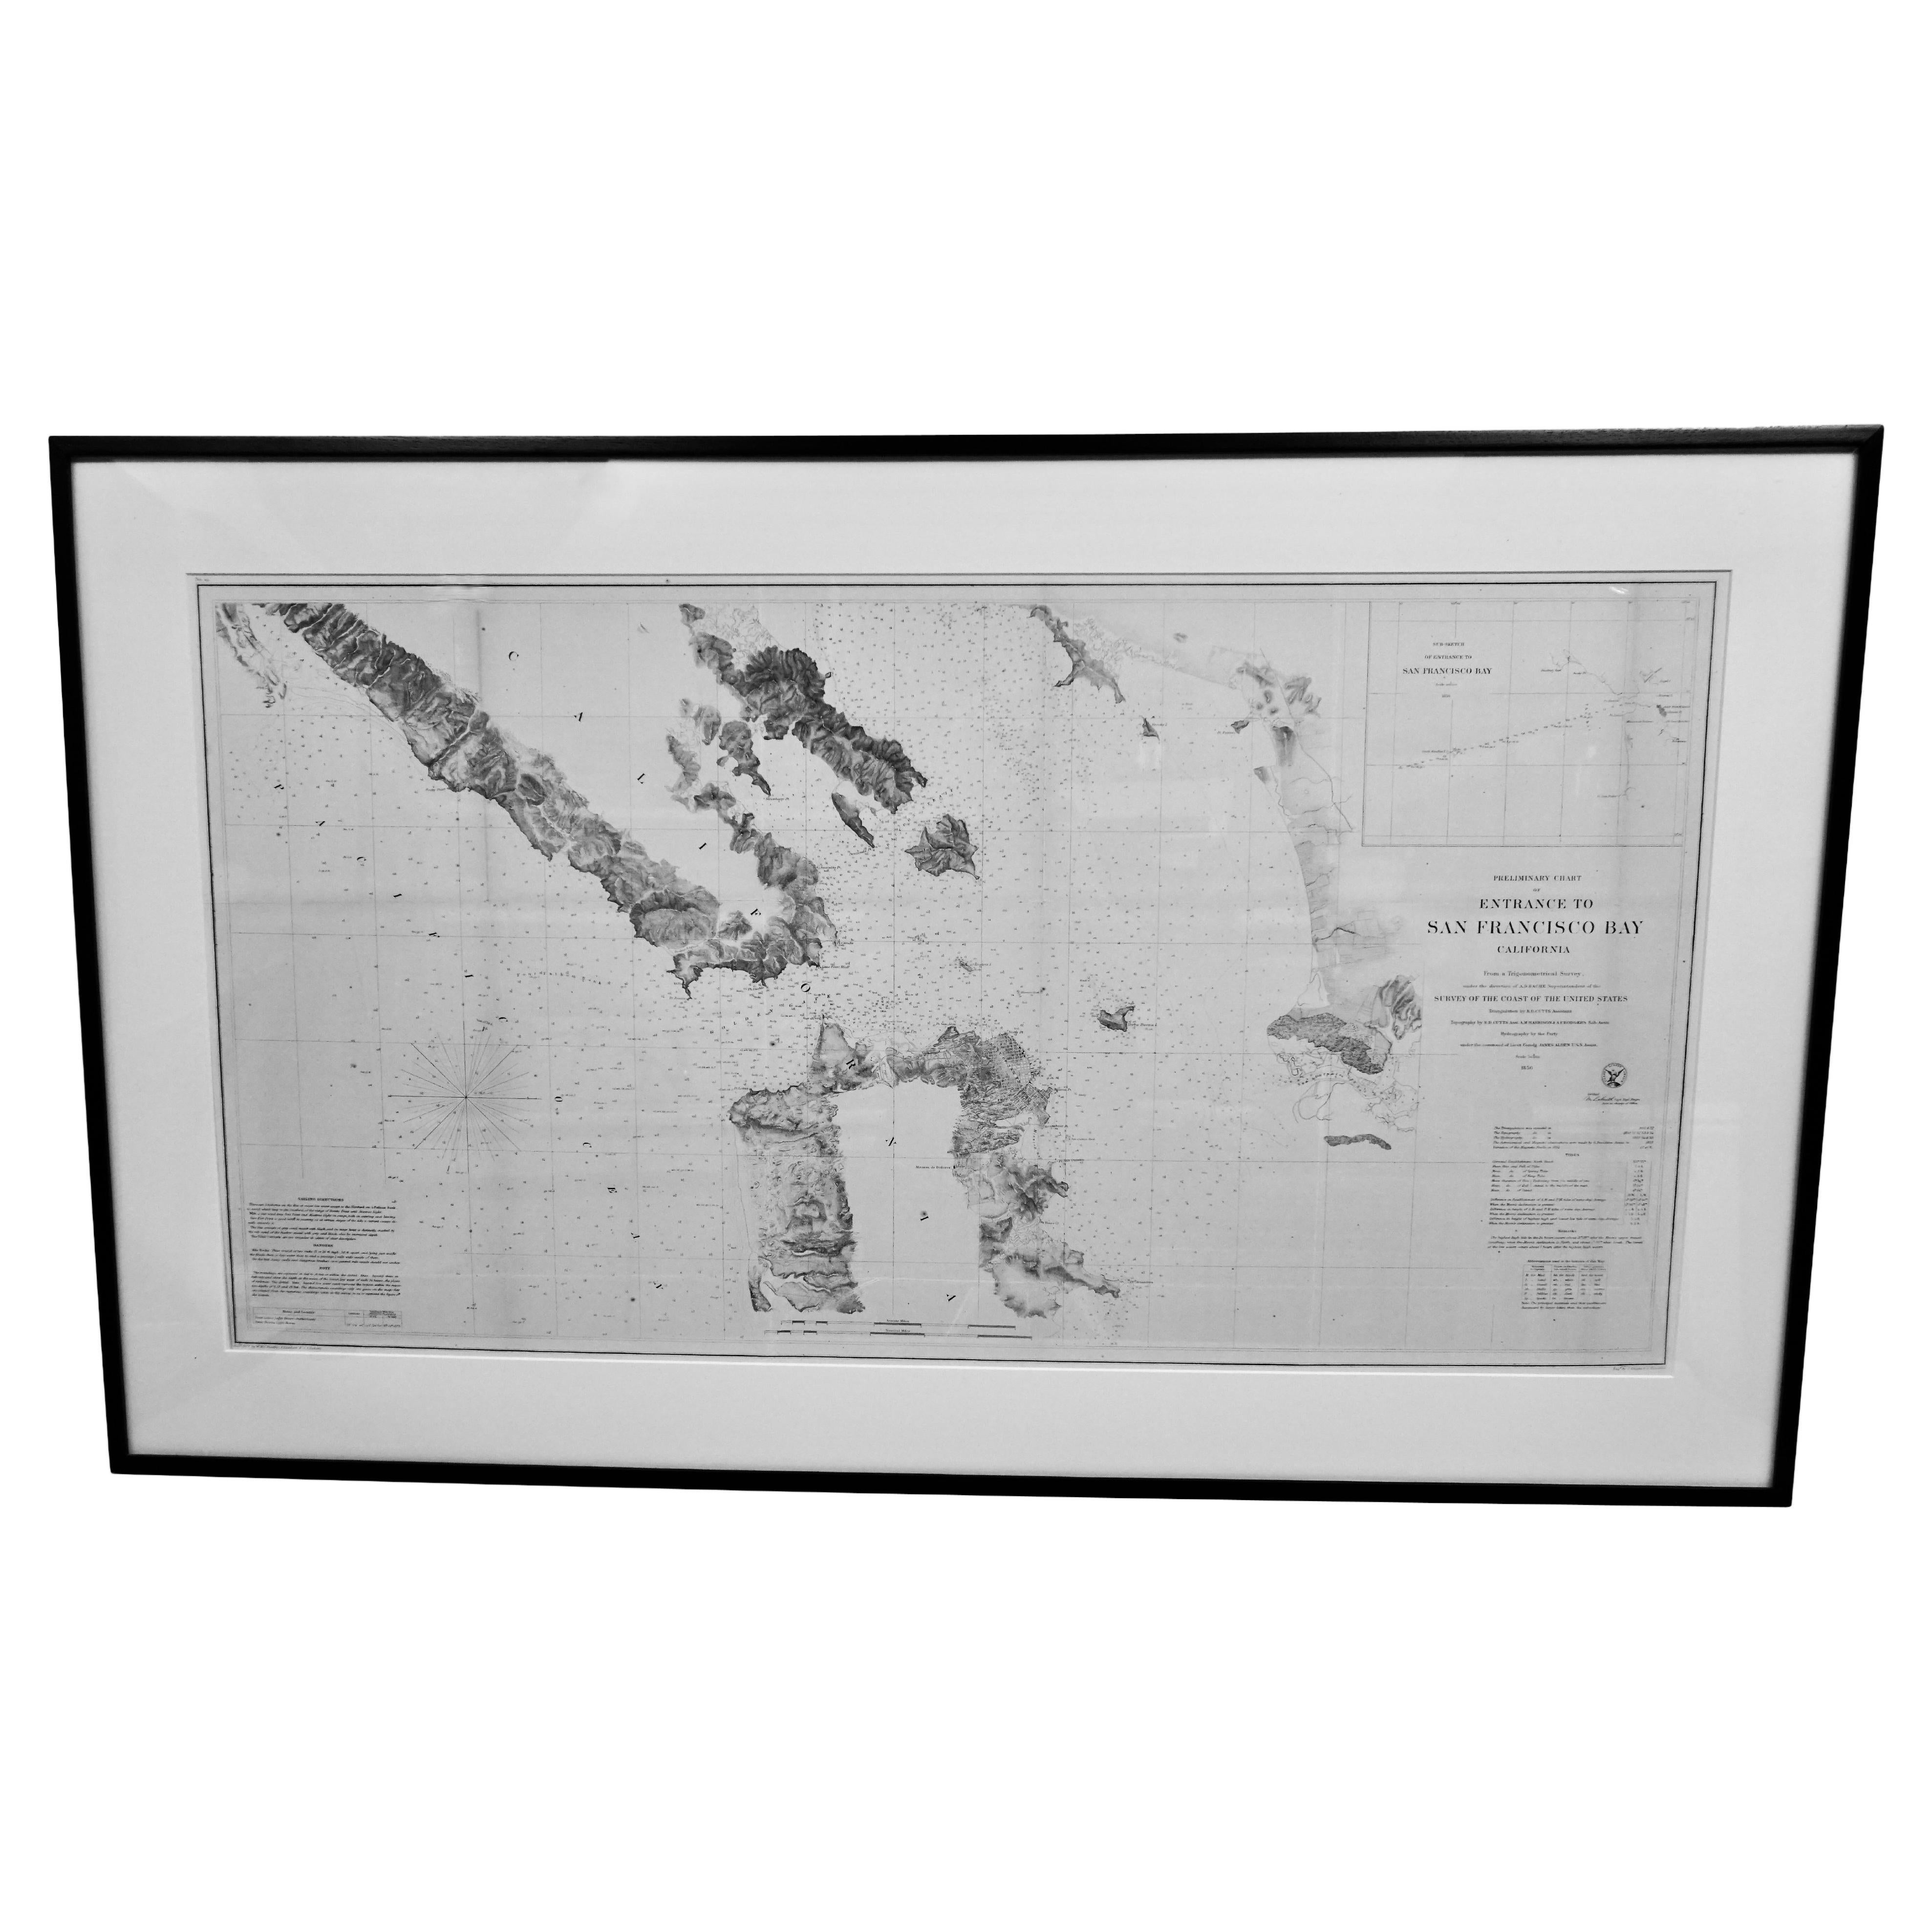 Scarce U.S. Coast Survey Map Depicting Entrance to San Francisco Bay Dated 1856 For Sale